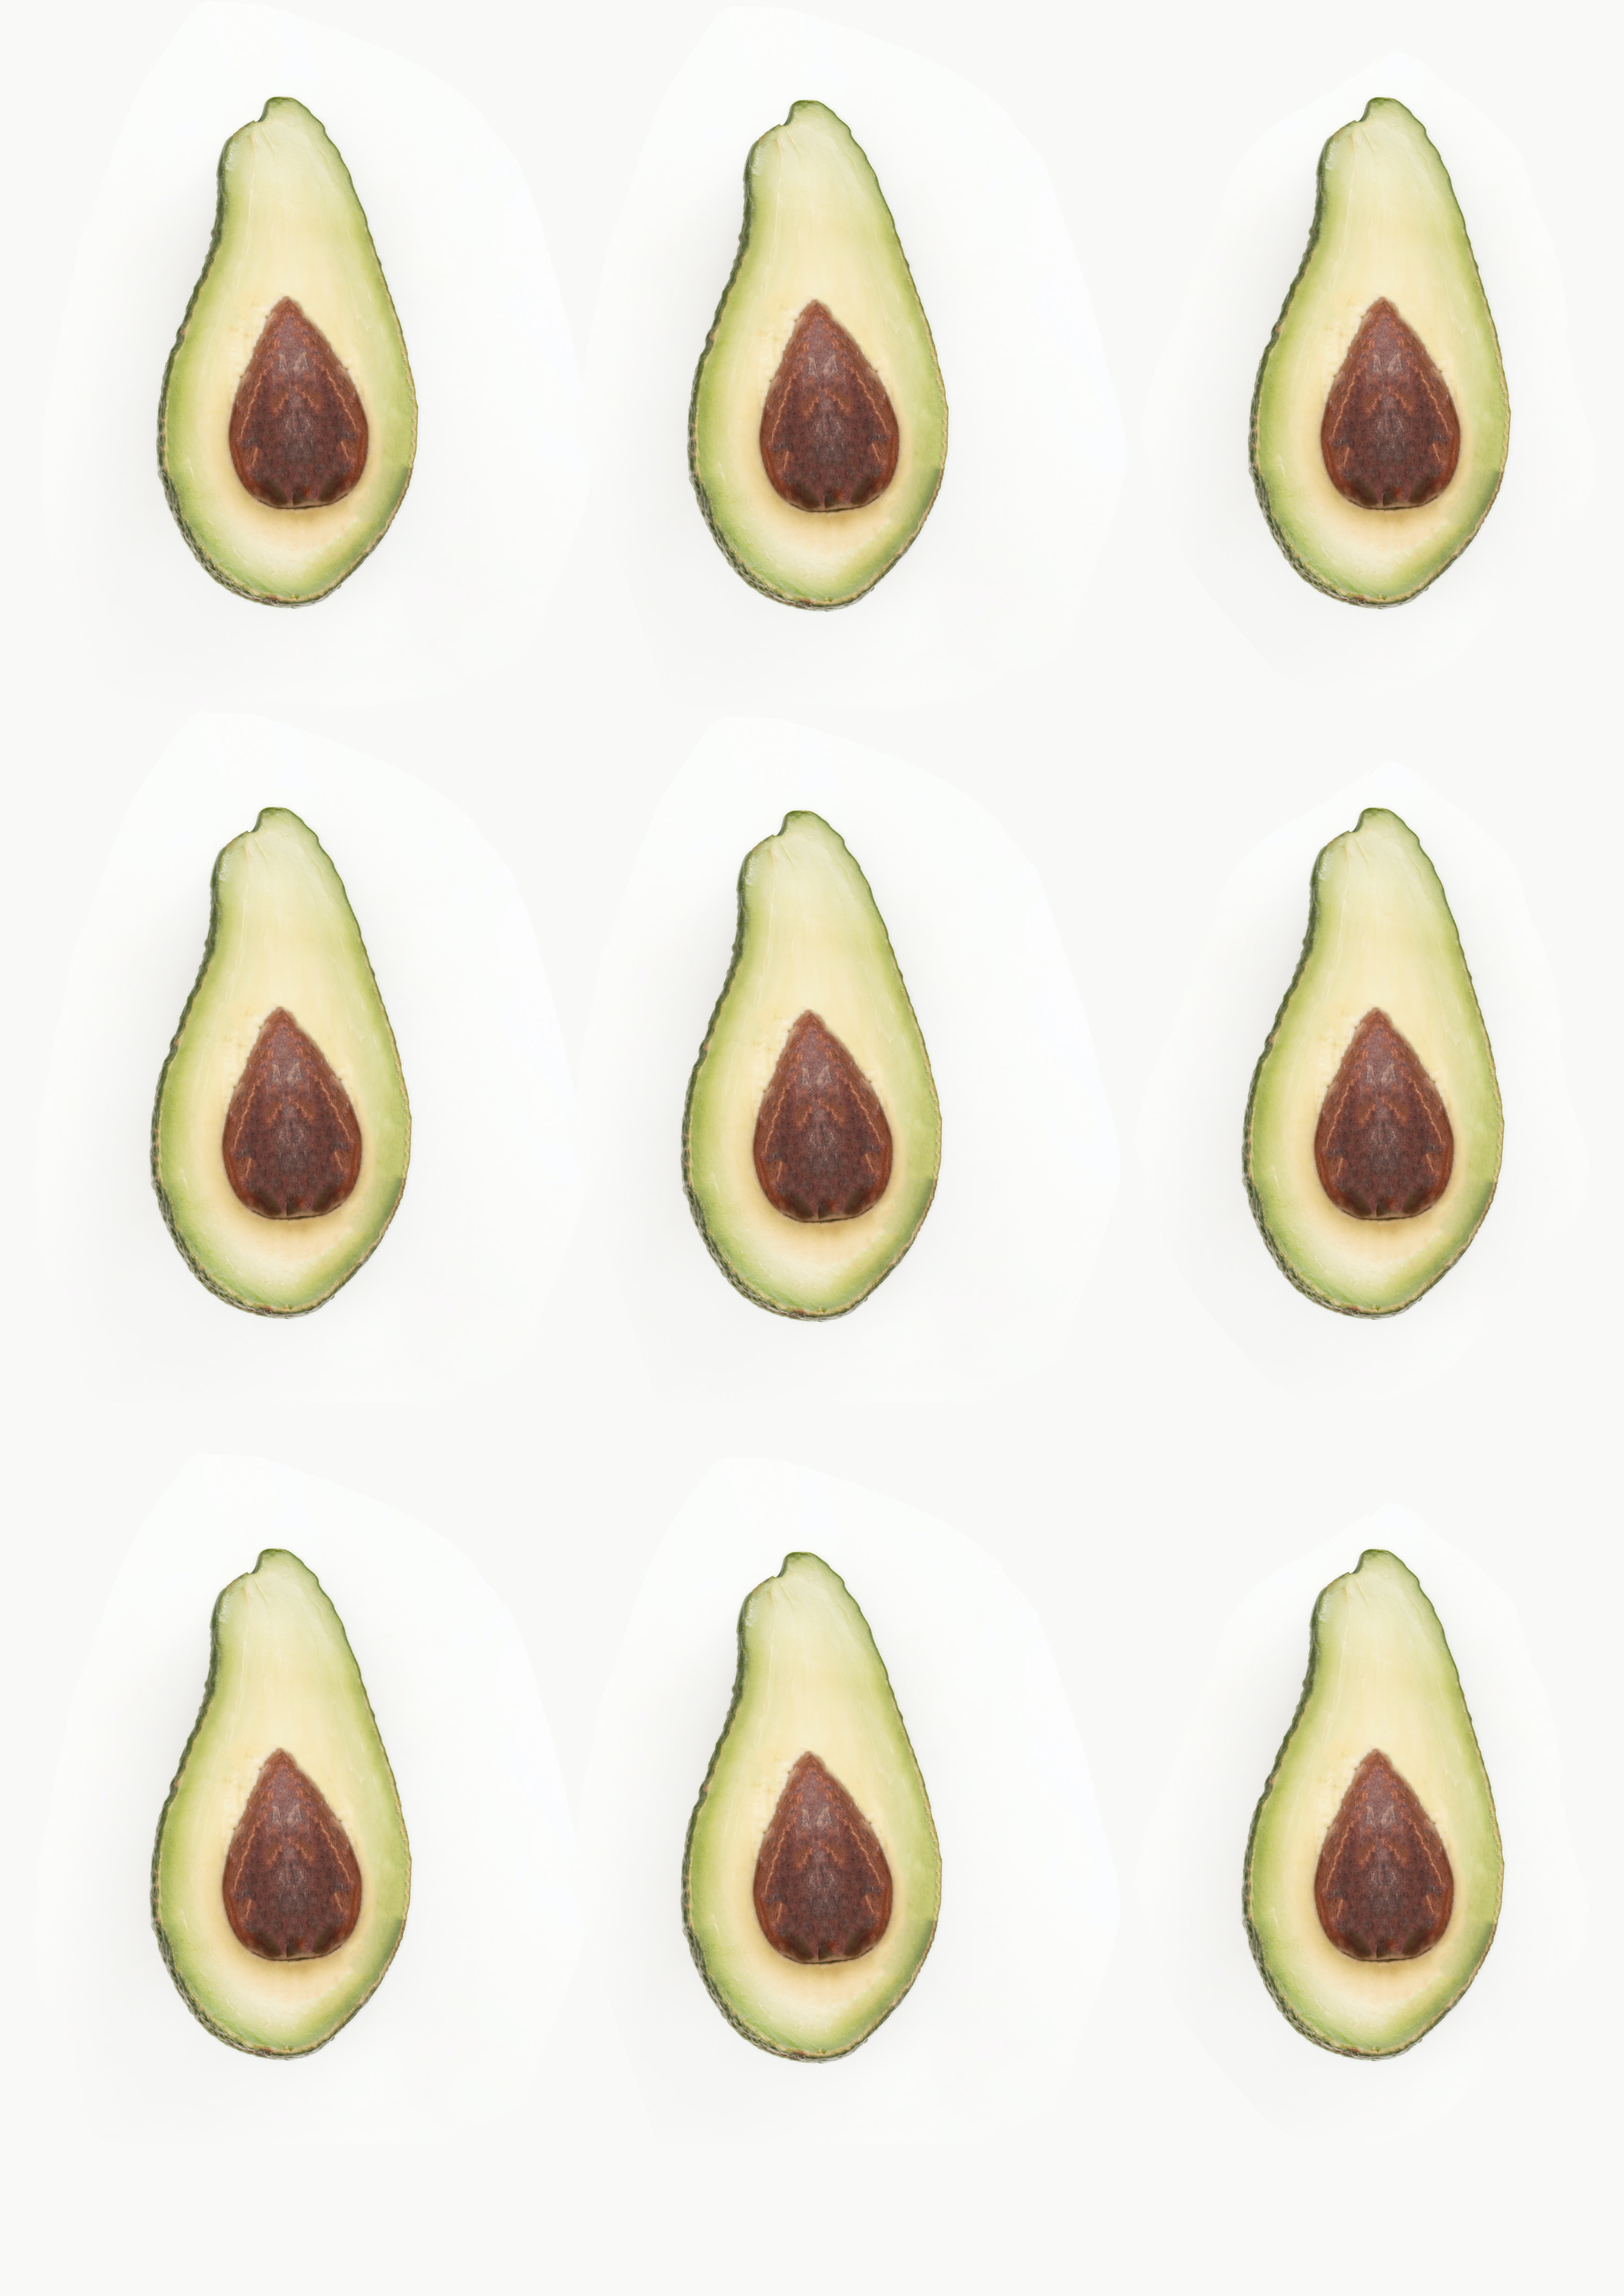 Avocados on a background.